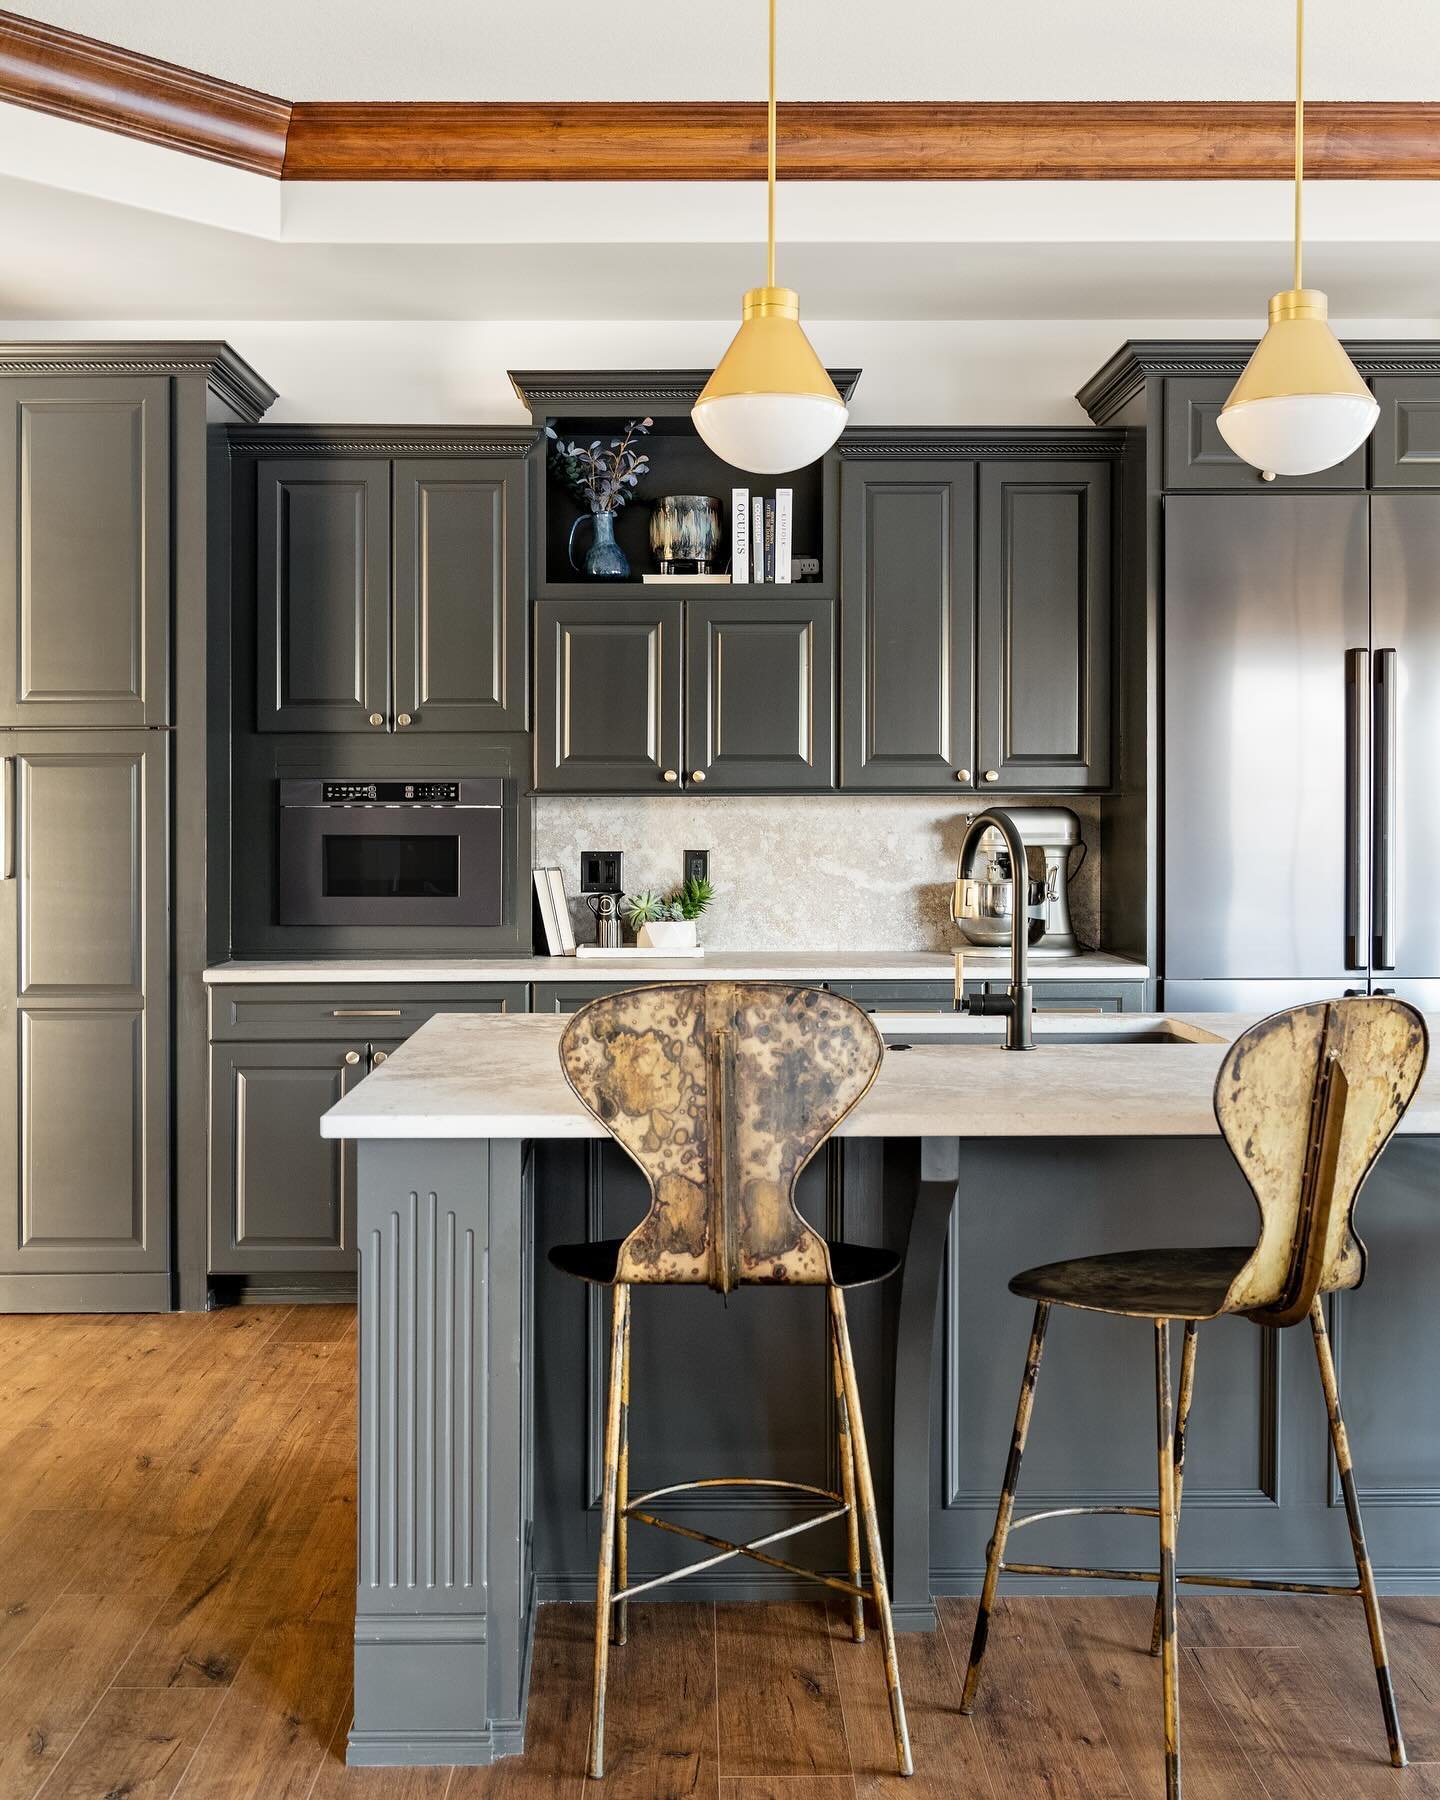 Updating the hosting spaces on both levels of the home were an important piece of this project 🥂

The white kitchen cabinets felt underwhelming with our overall design end goal so we decided to paint them a smokey dark gray to give the kitchen its o